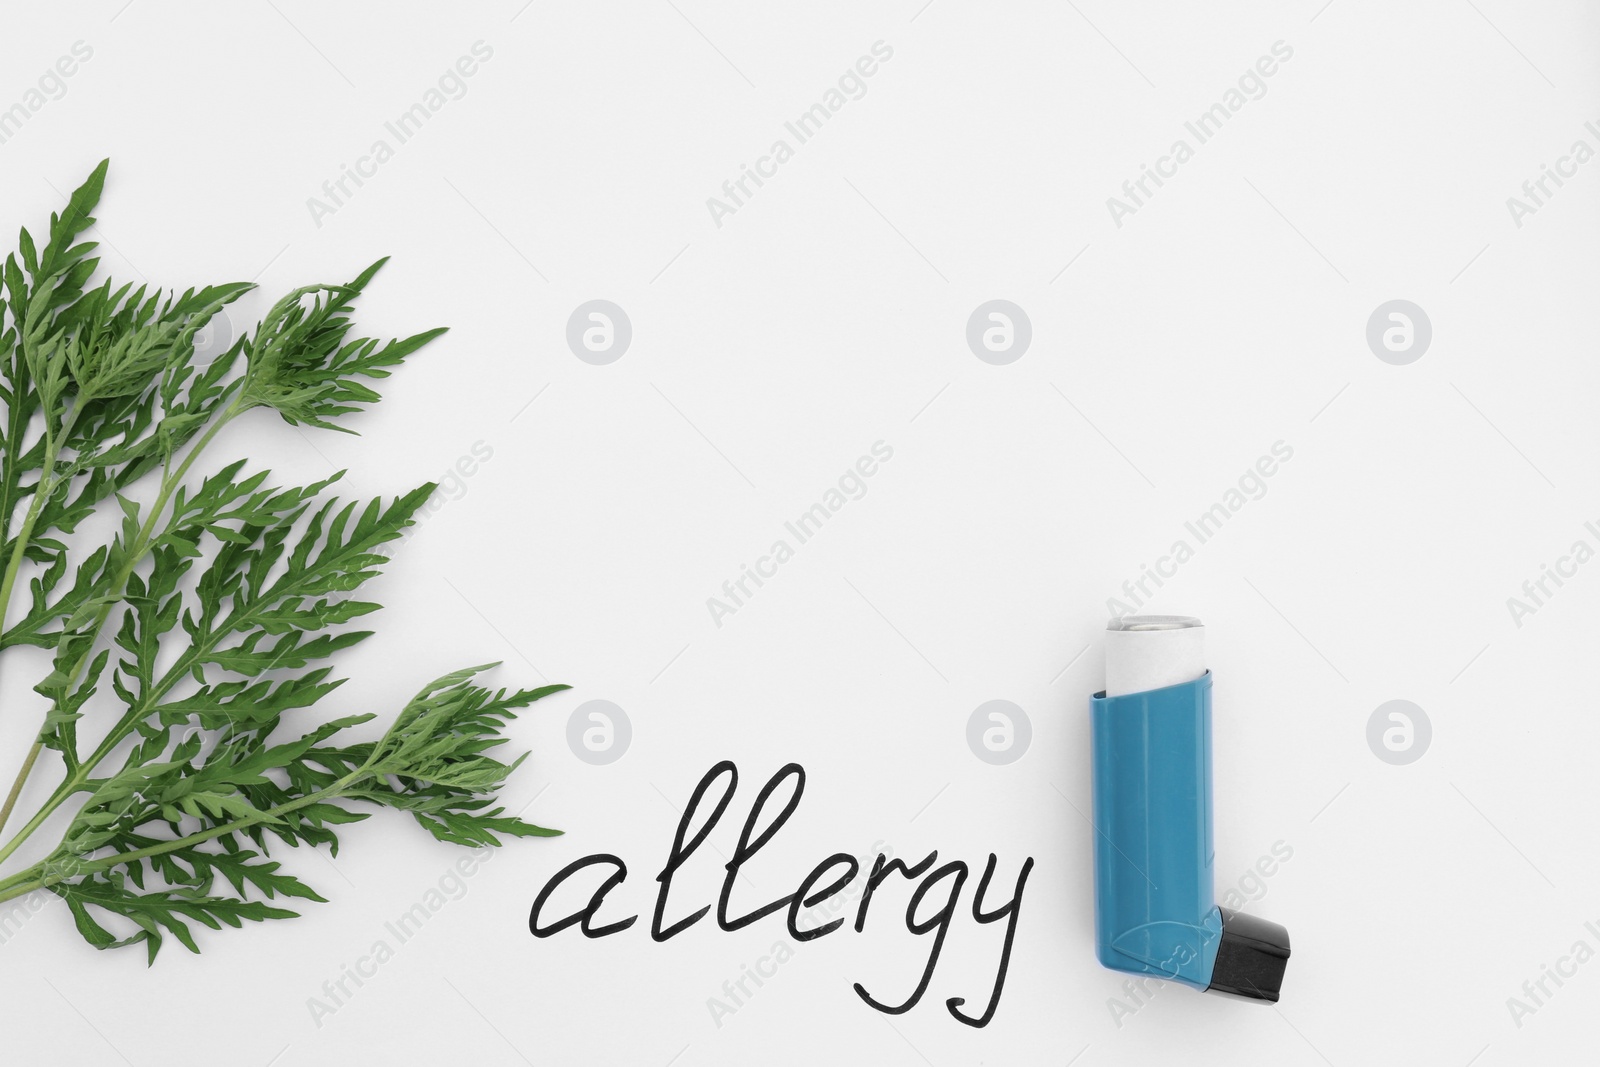 Photo of Ragweed plant (Ambrosia genus), asthma inhaler and word "ALLERGY" written on white background, top view